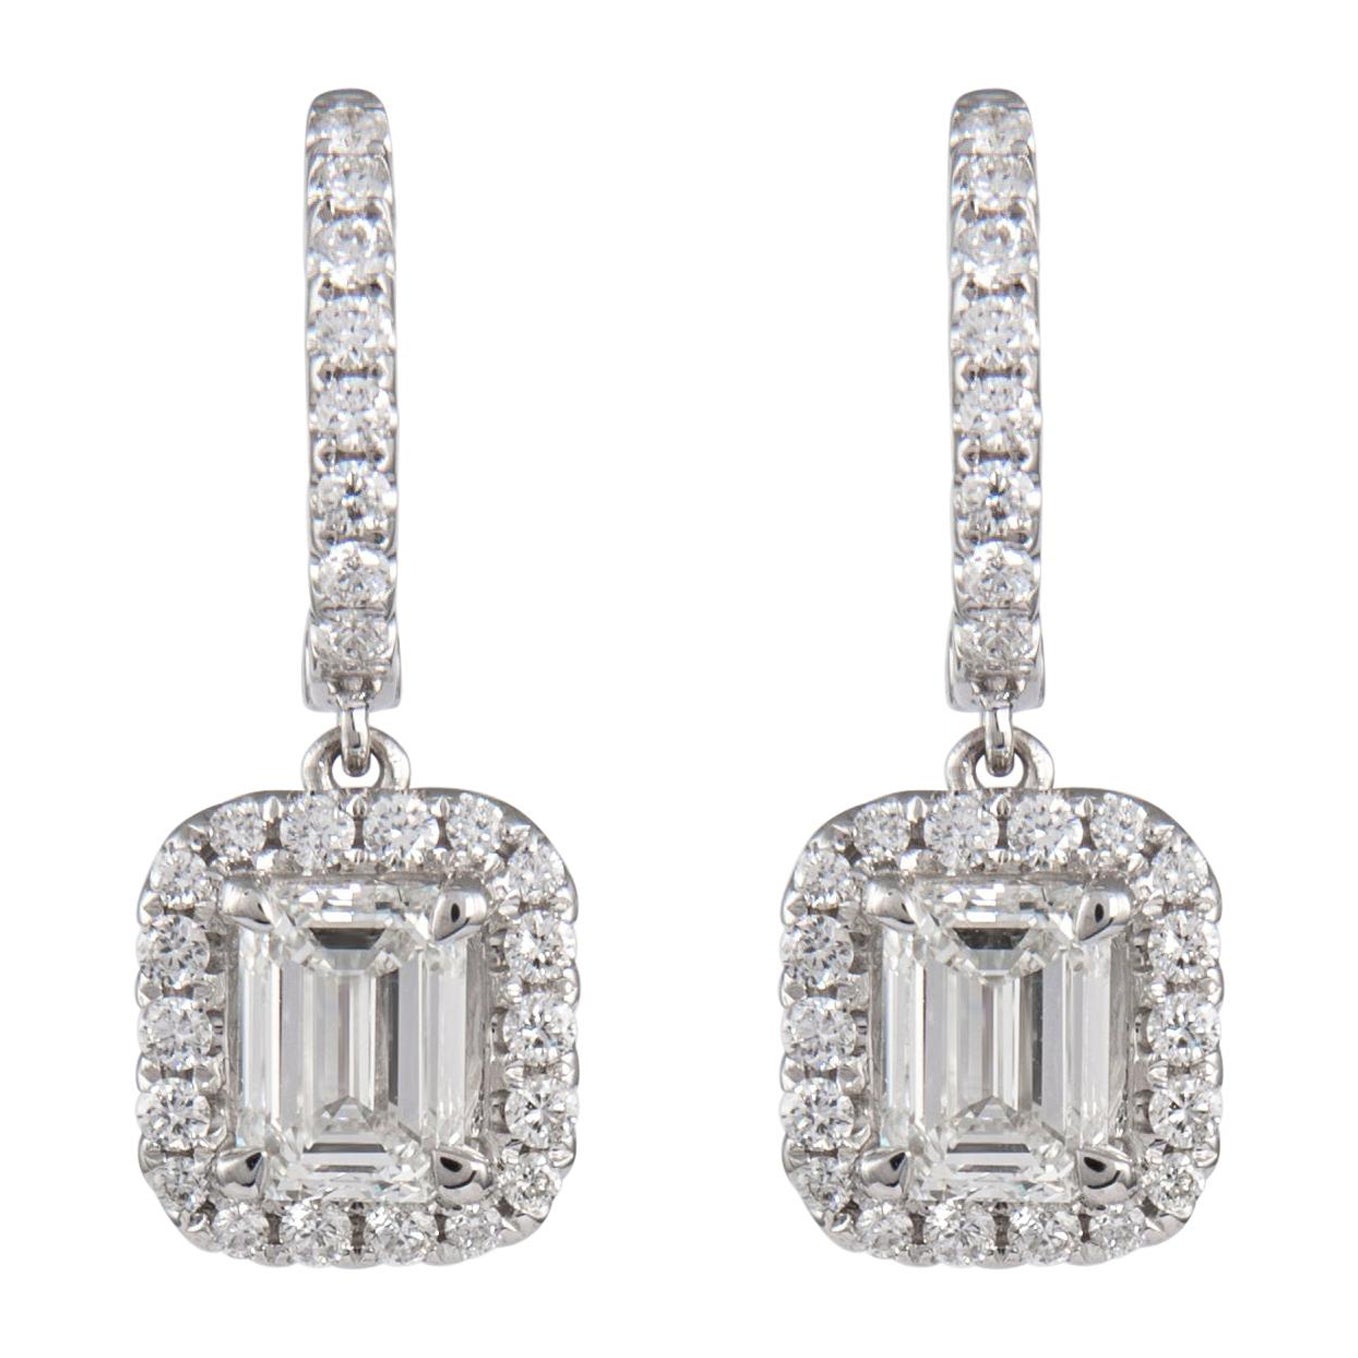 Alexander GIA 2.04ct Emerald Cut Diamond Drop Earrings with Halo 18k White Gold